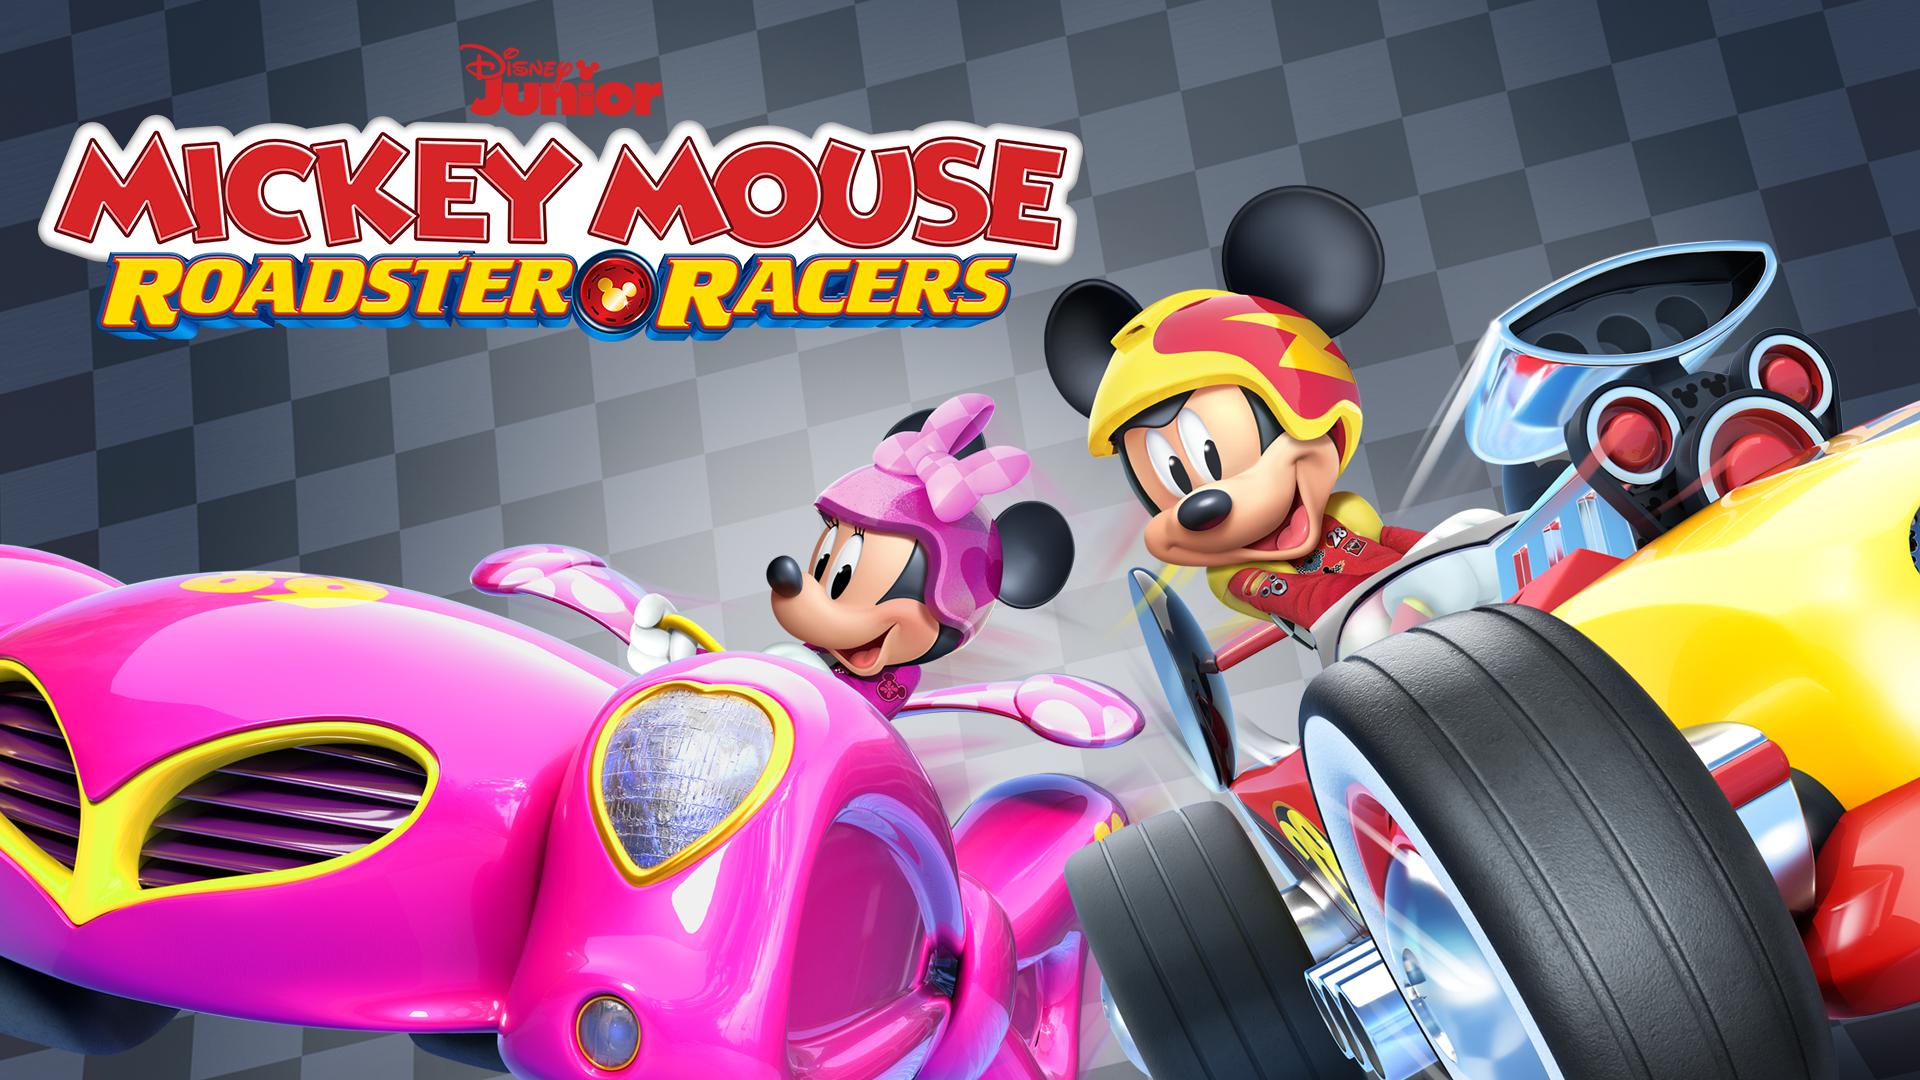 Disney+ and the Roadster Racers (2017)